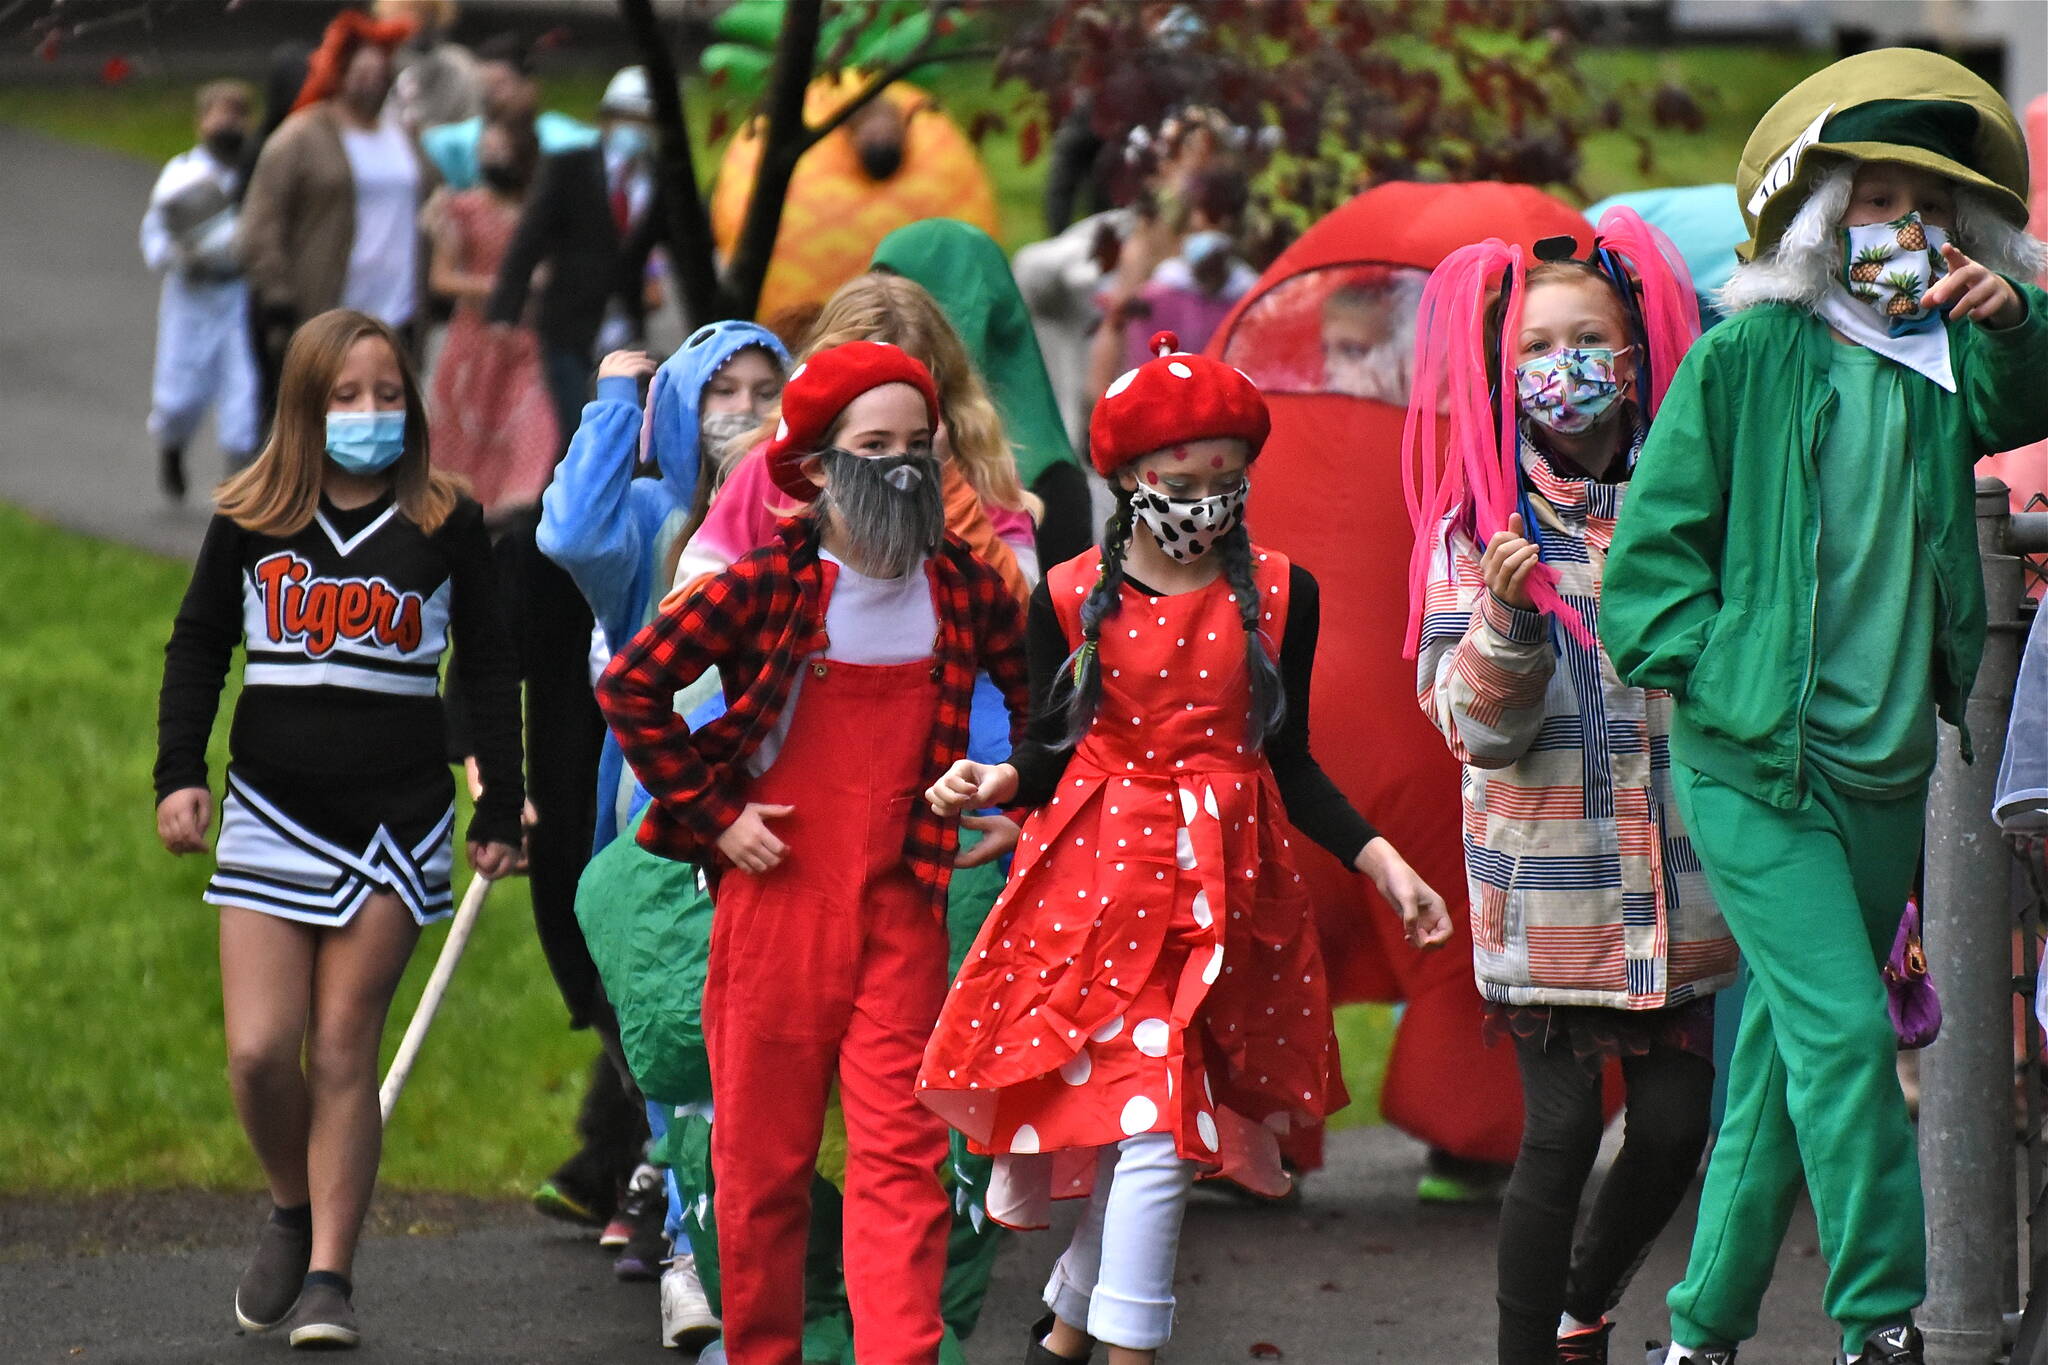 Staff photo/Tate Thomson
Friday Harbor Elementary School students showed off their costumes at the 2021 Halloween Parade on Friday, Oct. 29 at 9 a.m.